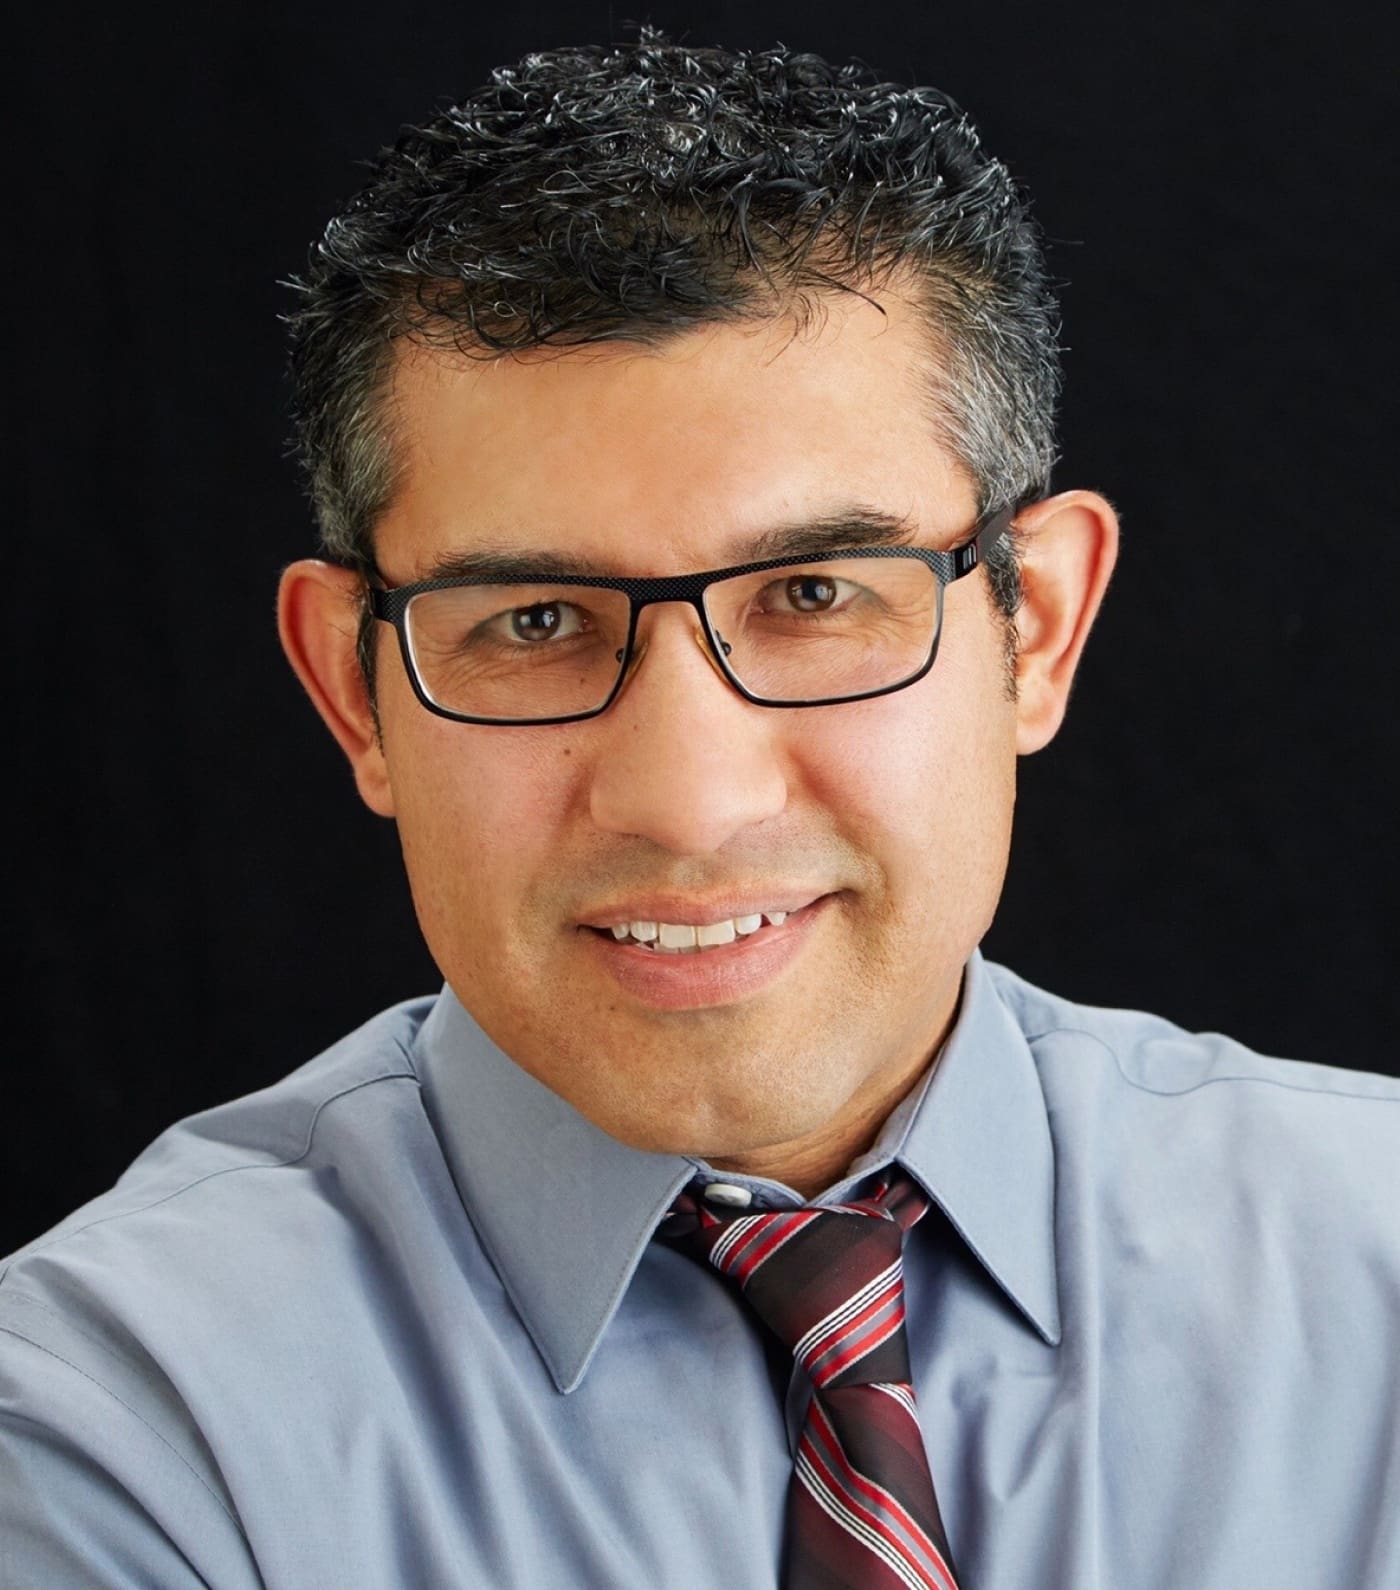 Headshot of Eli. He is a hespanic man with black and white short cropped hair. He wears black glasses and a tie.